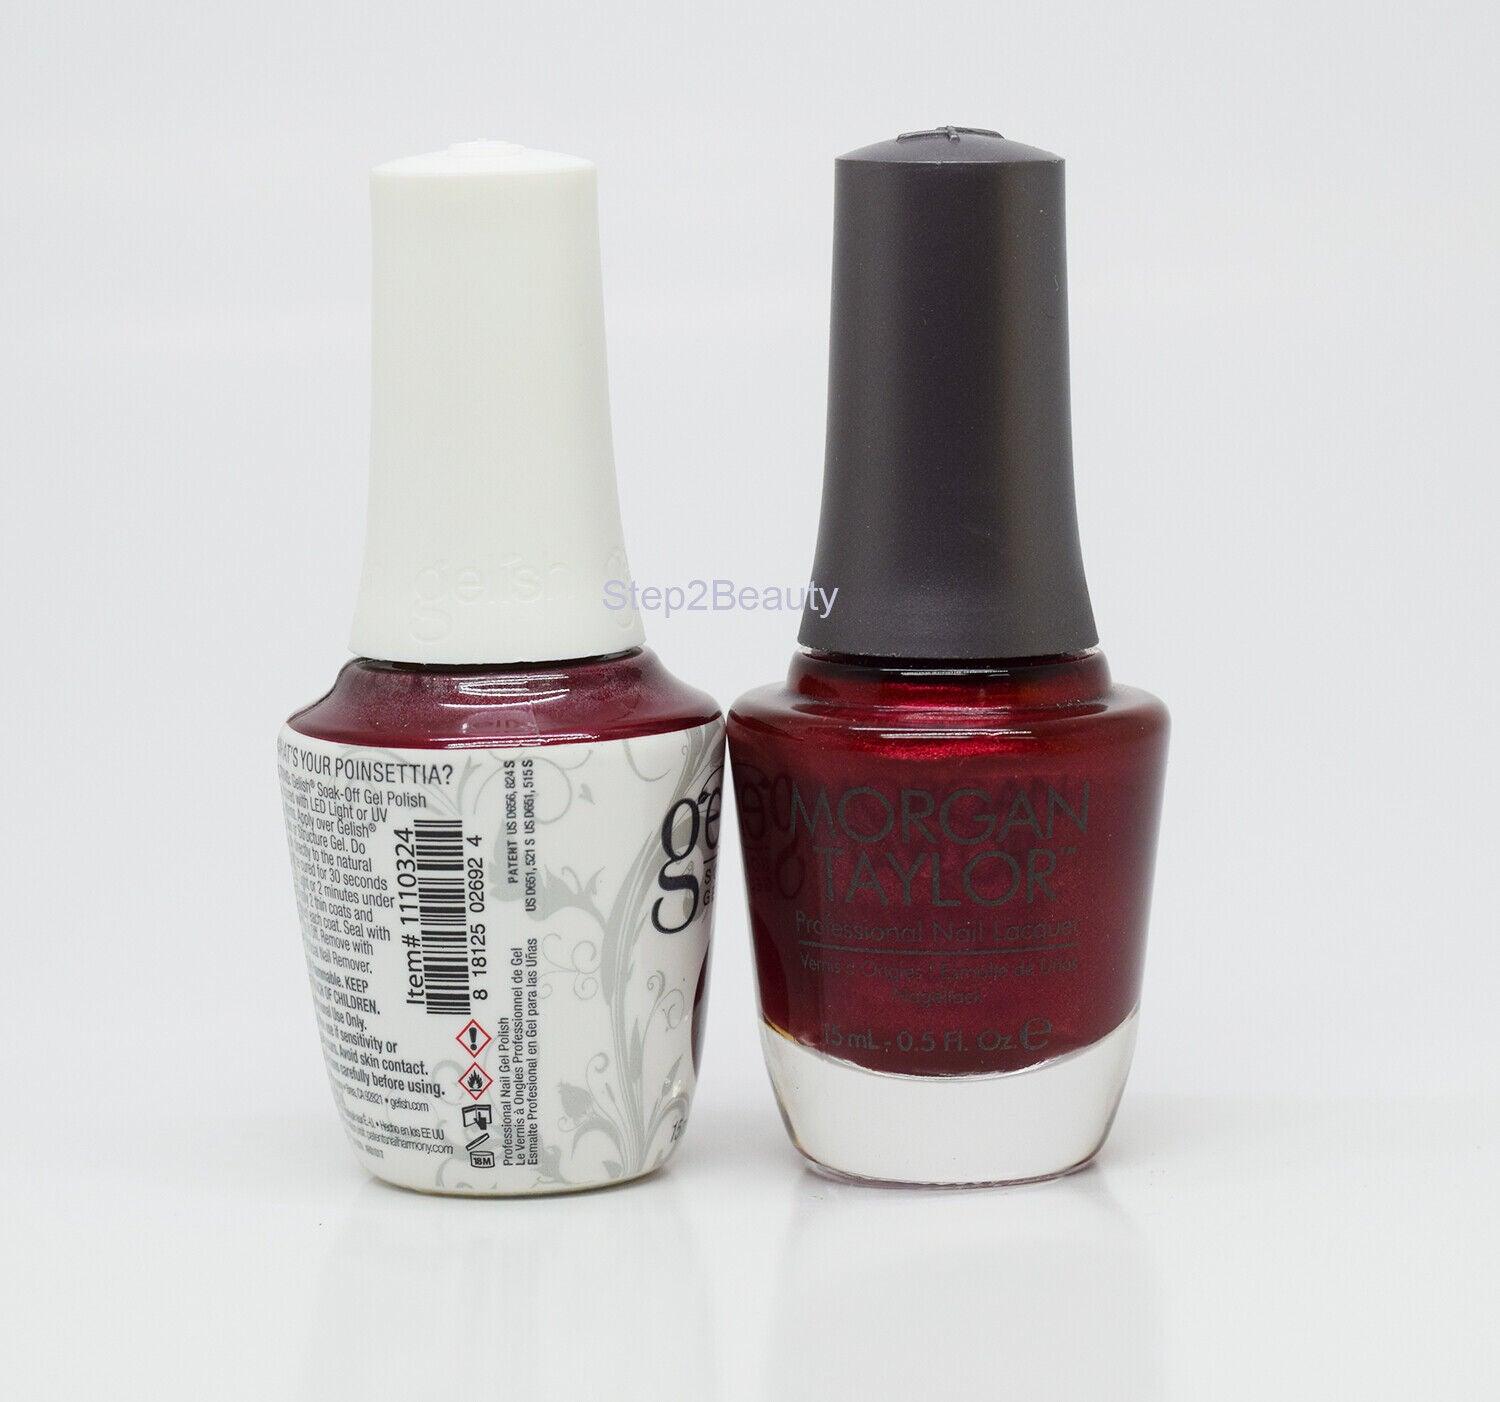 Gelish DUO Soak Off Gel Polish +Morgan Taylor Lacquer 324 What's Your Poinsettia